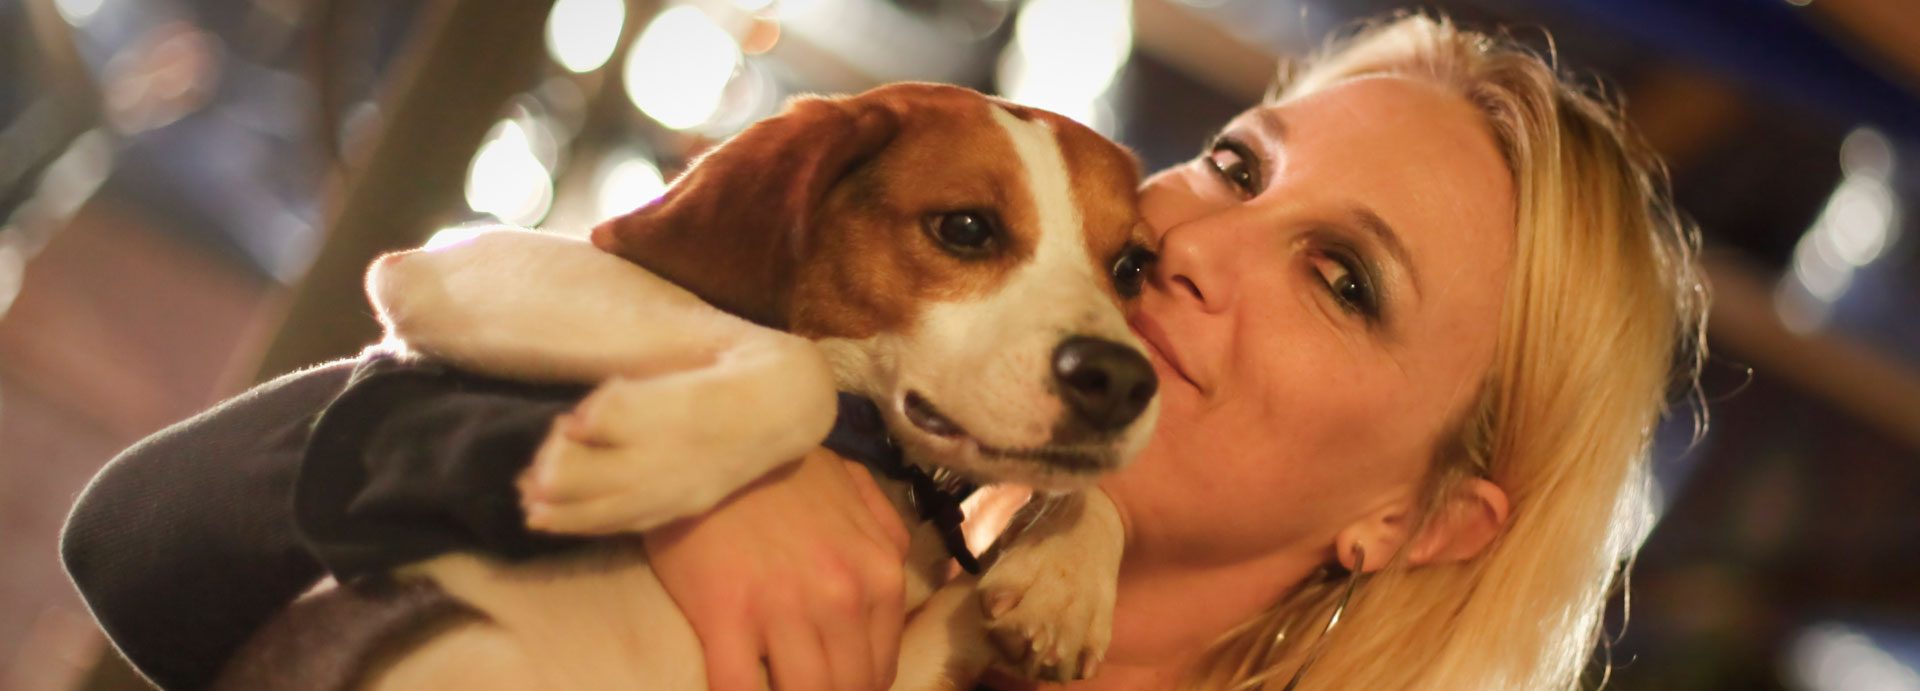 Hope for Thousands of Beagles Used in Laboratory Experiments